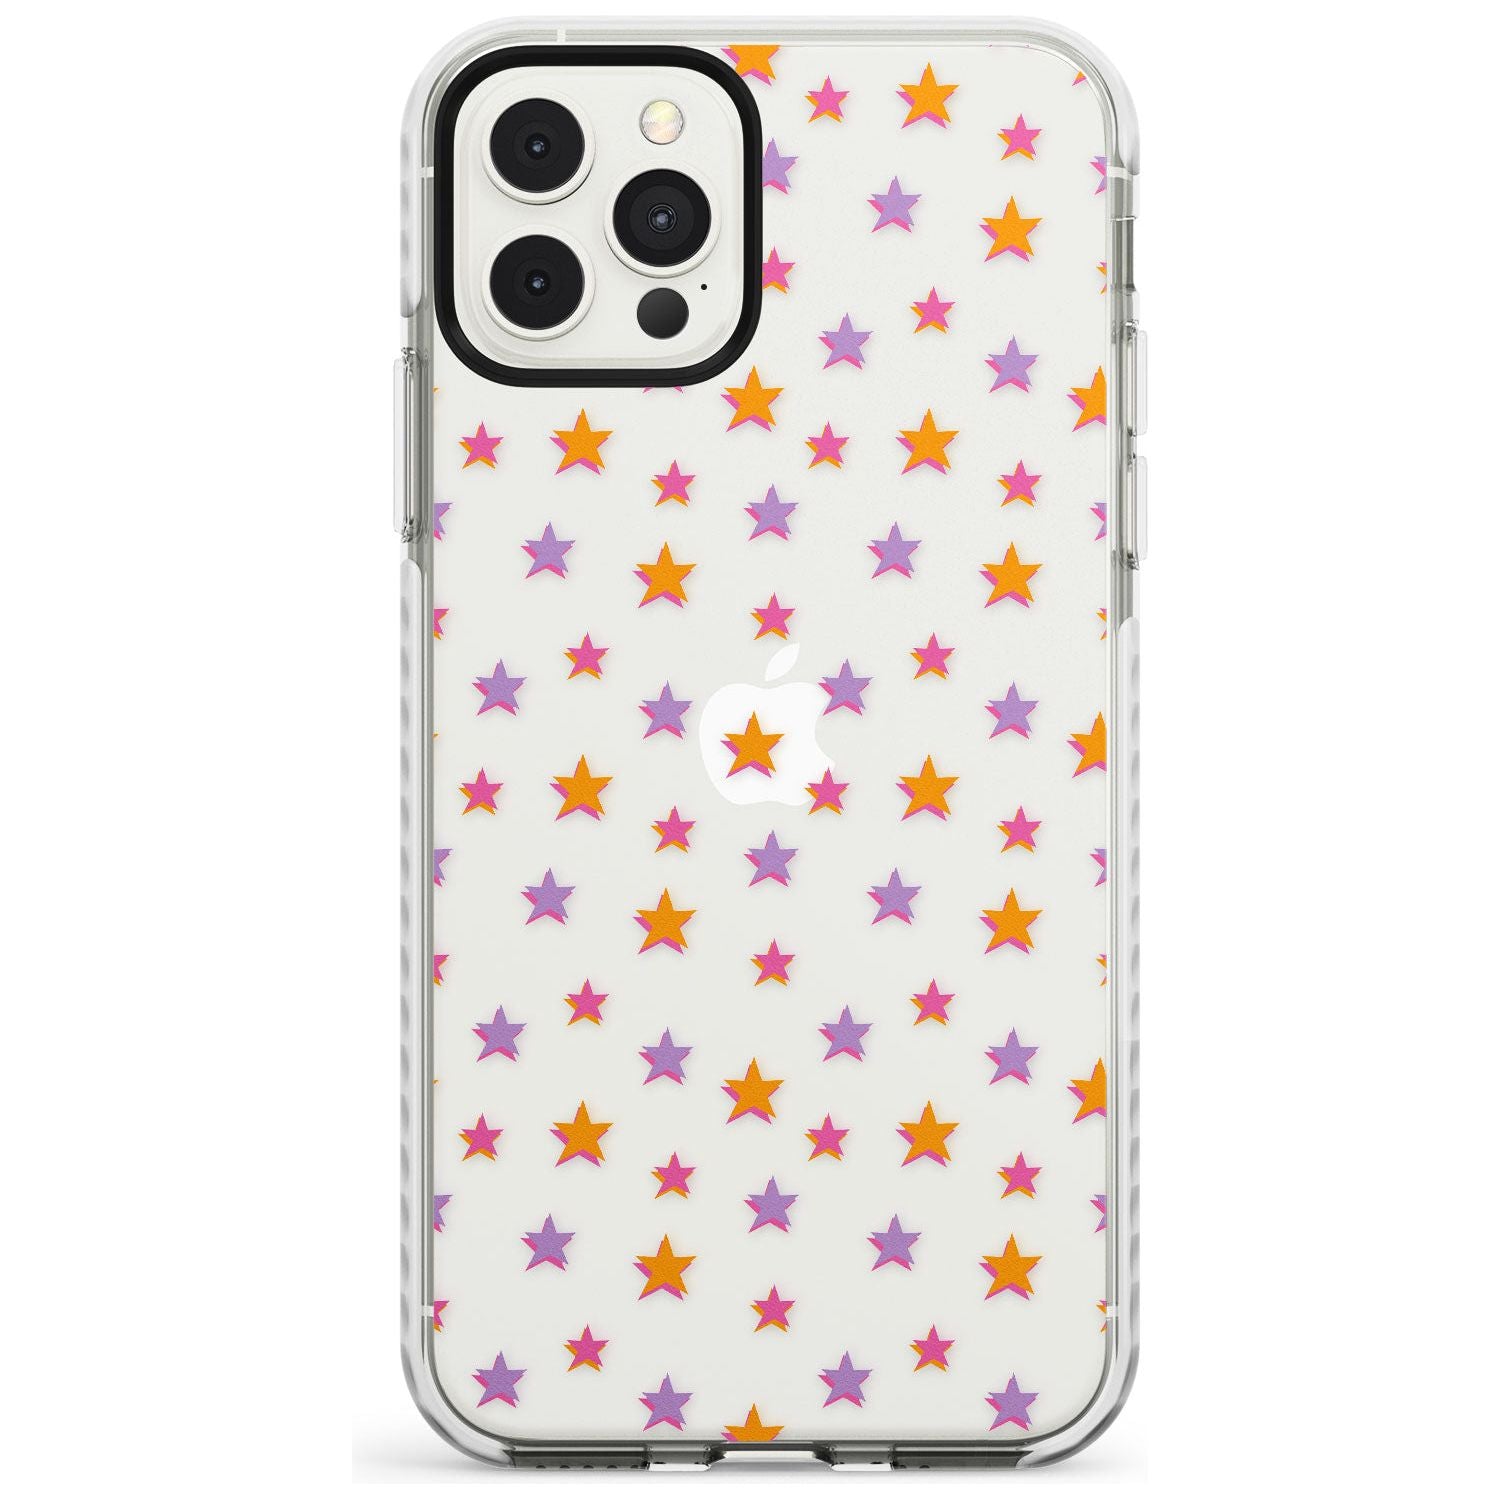 Spangling Stars Pattern Impact Phone Case for iPhone 11 Pro Max